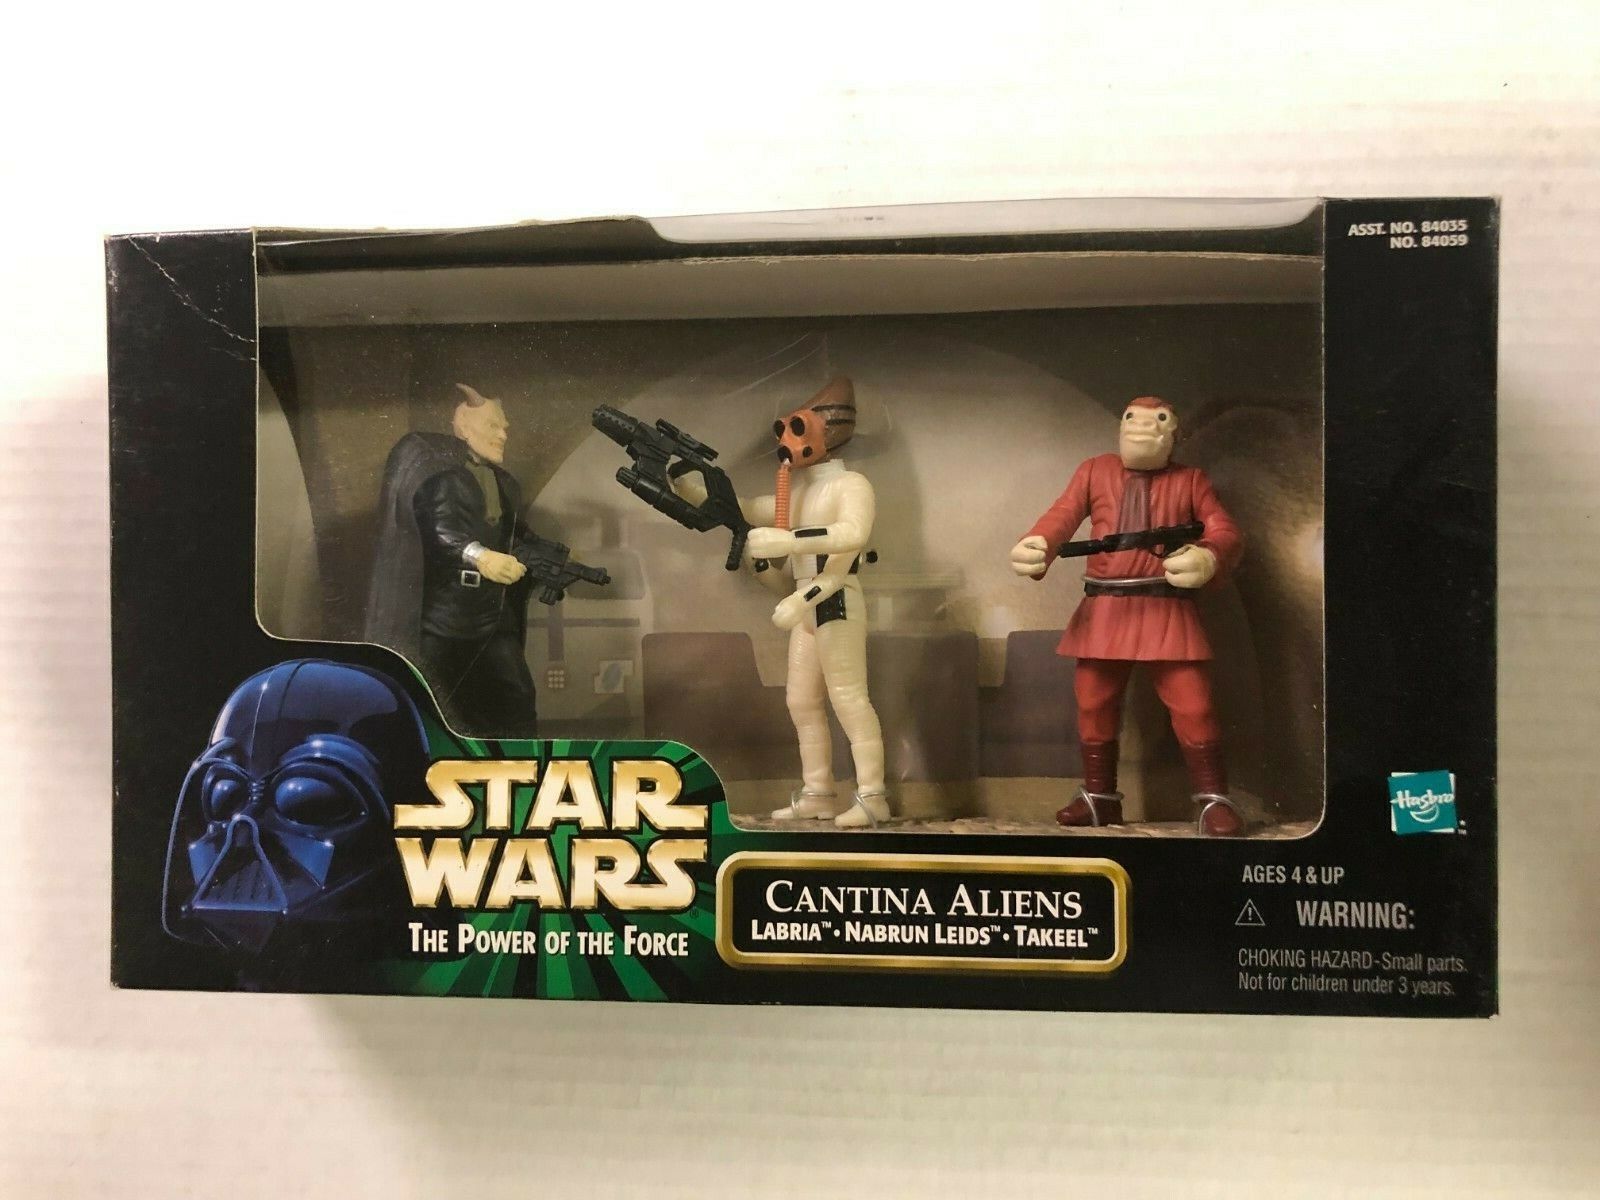 1998 Star Wars Power of the Force Cantina Aliens 3.75" Figure 3-Pack Hasbro